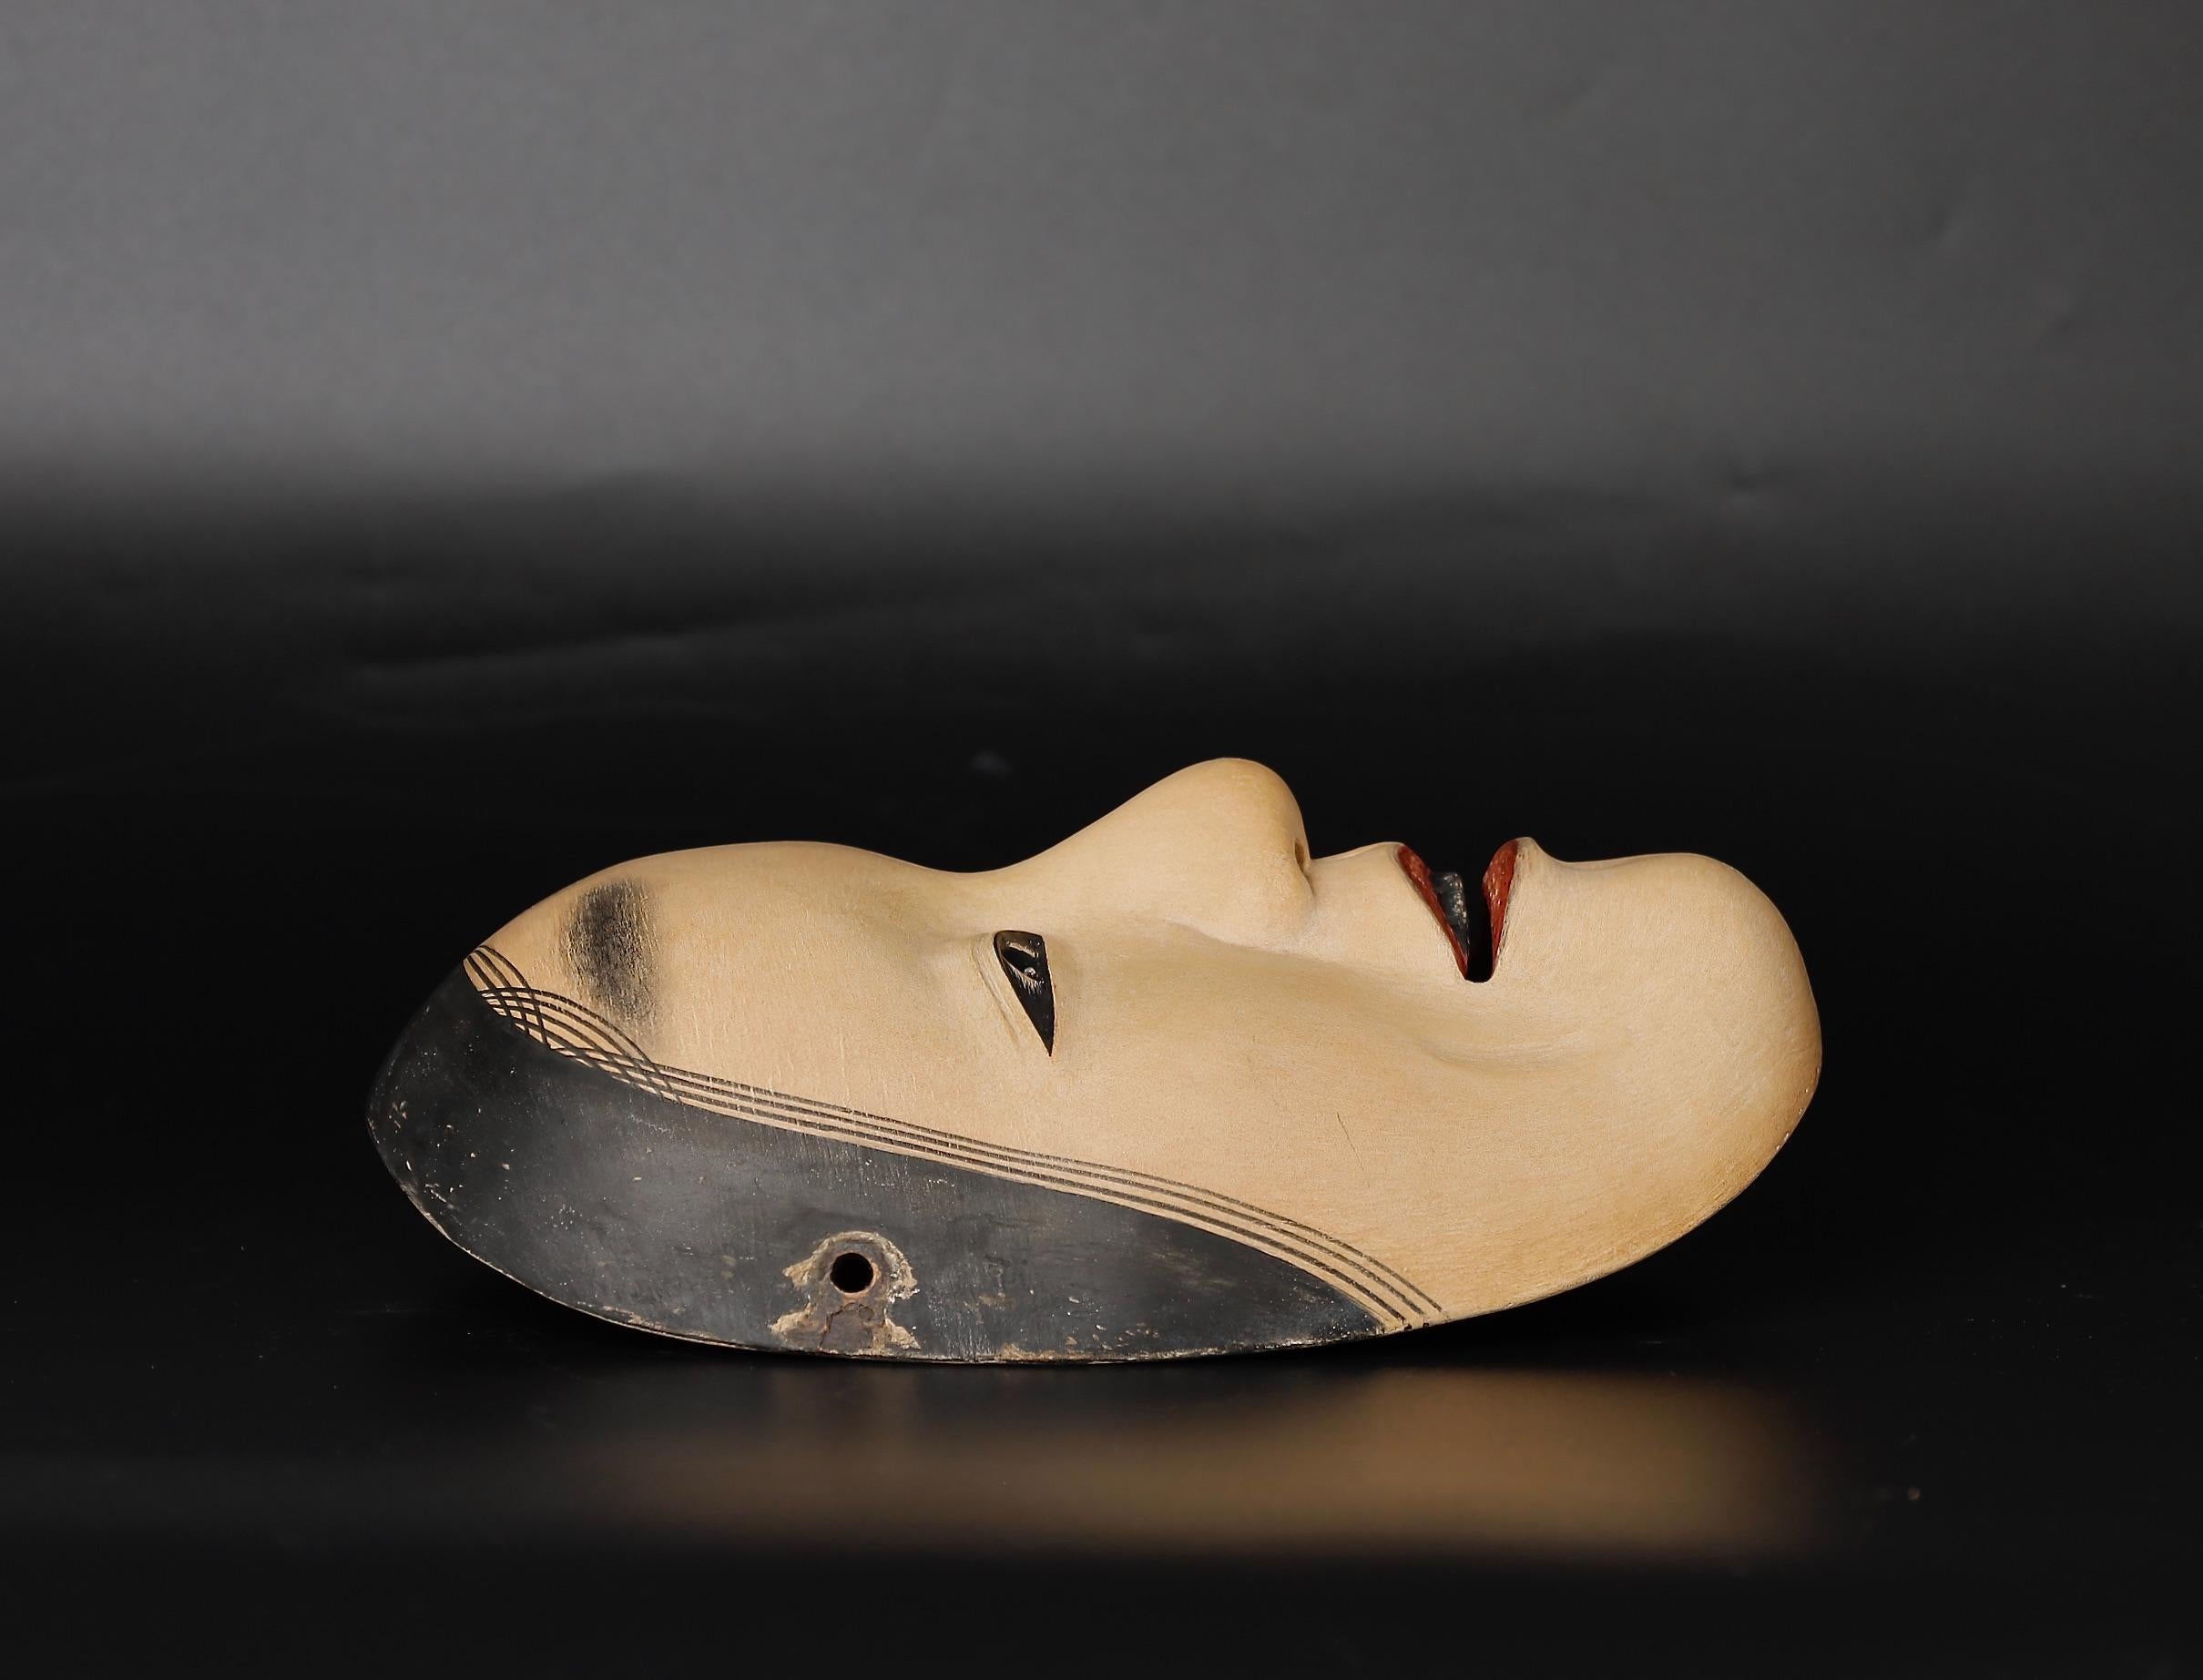 Wood Authentic Japanese Fukai Noh Mask Depicting Heartbreak of a Middle-Aged Woman For Sale